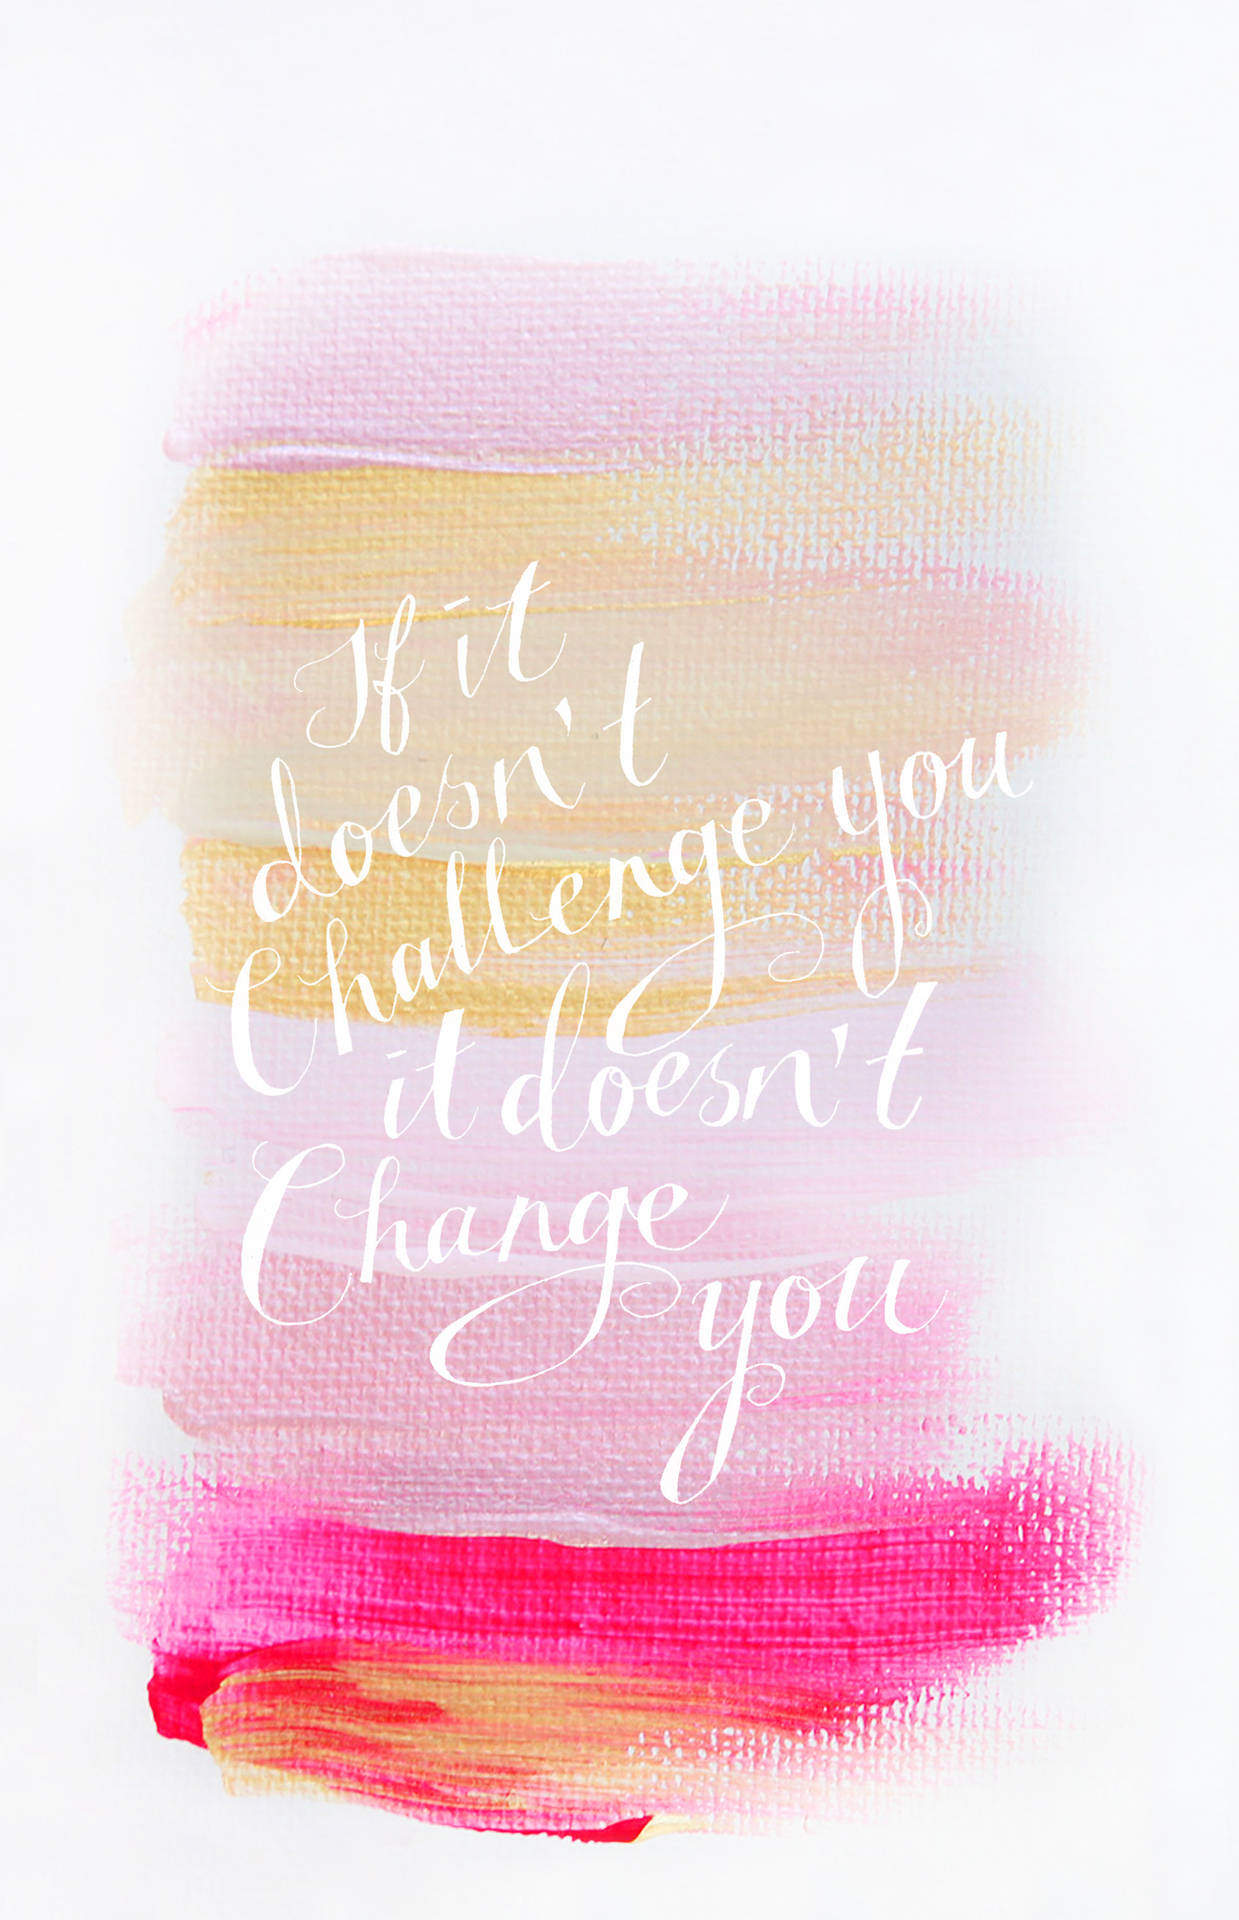 Aesthetic Yellow And Pink Cute Positive Quotes